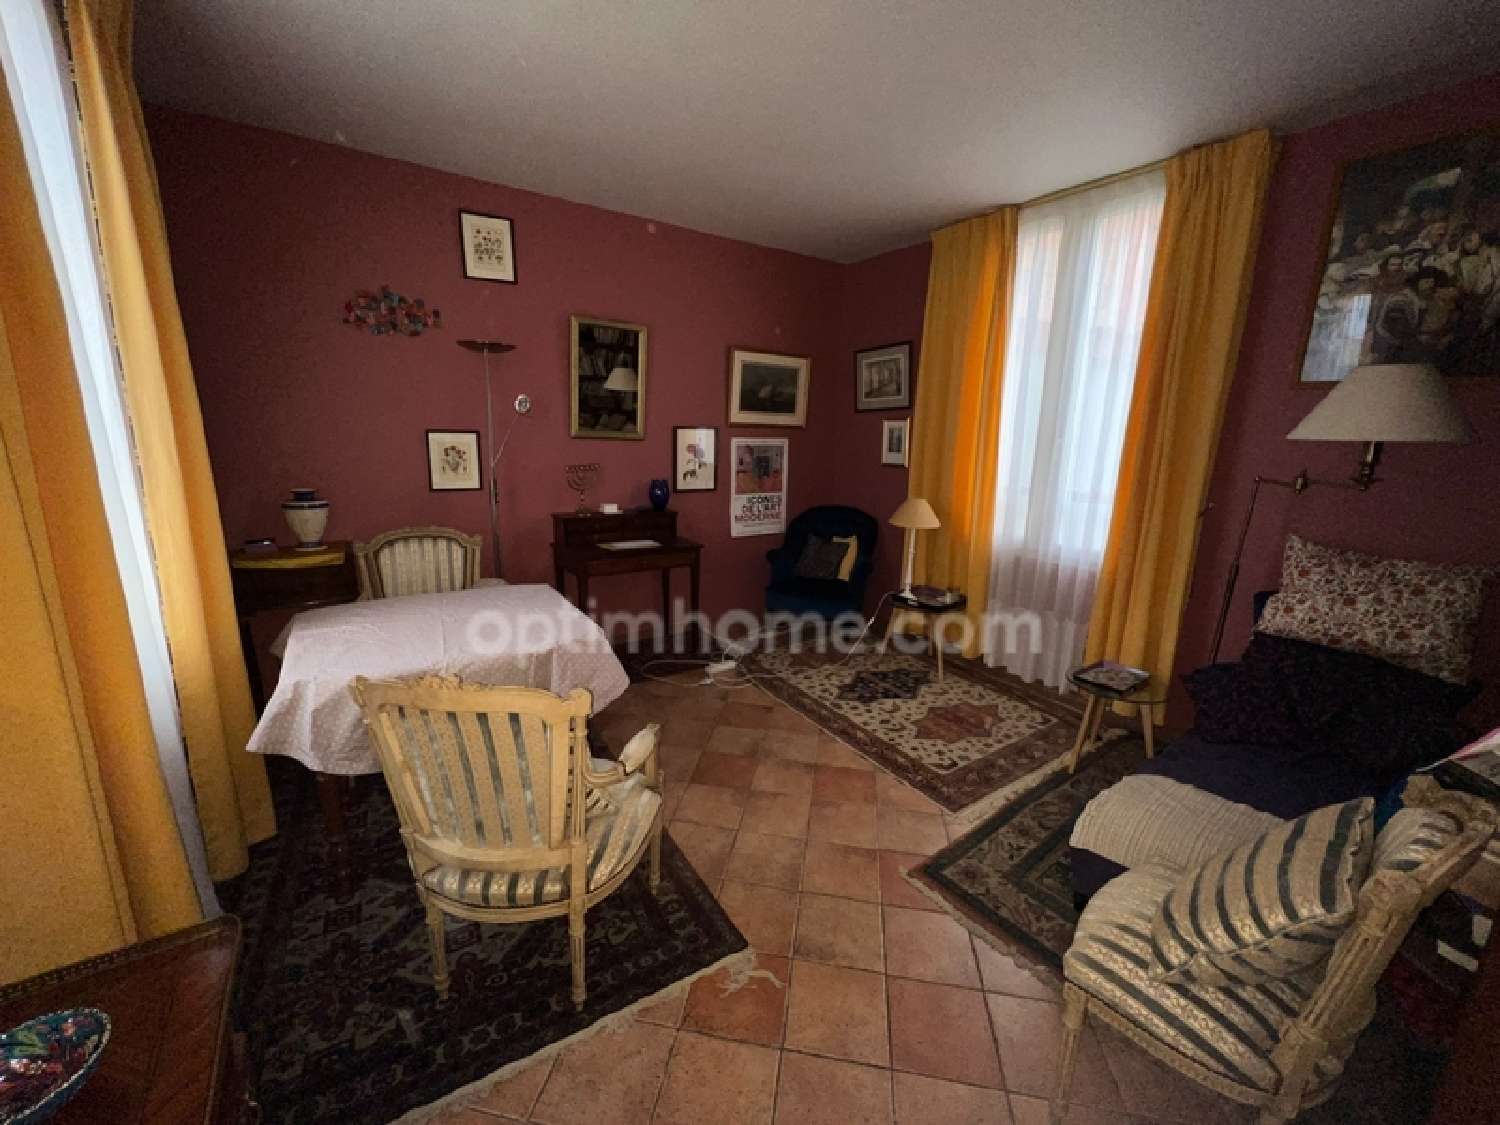  for sale city house Lisieux Calvados 4